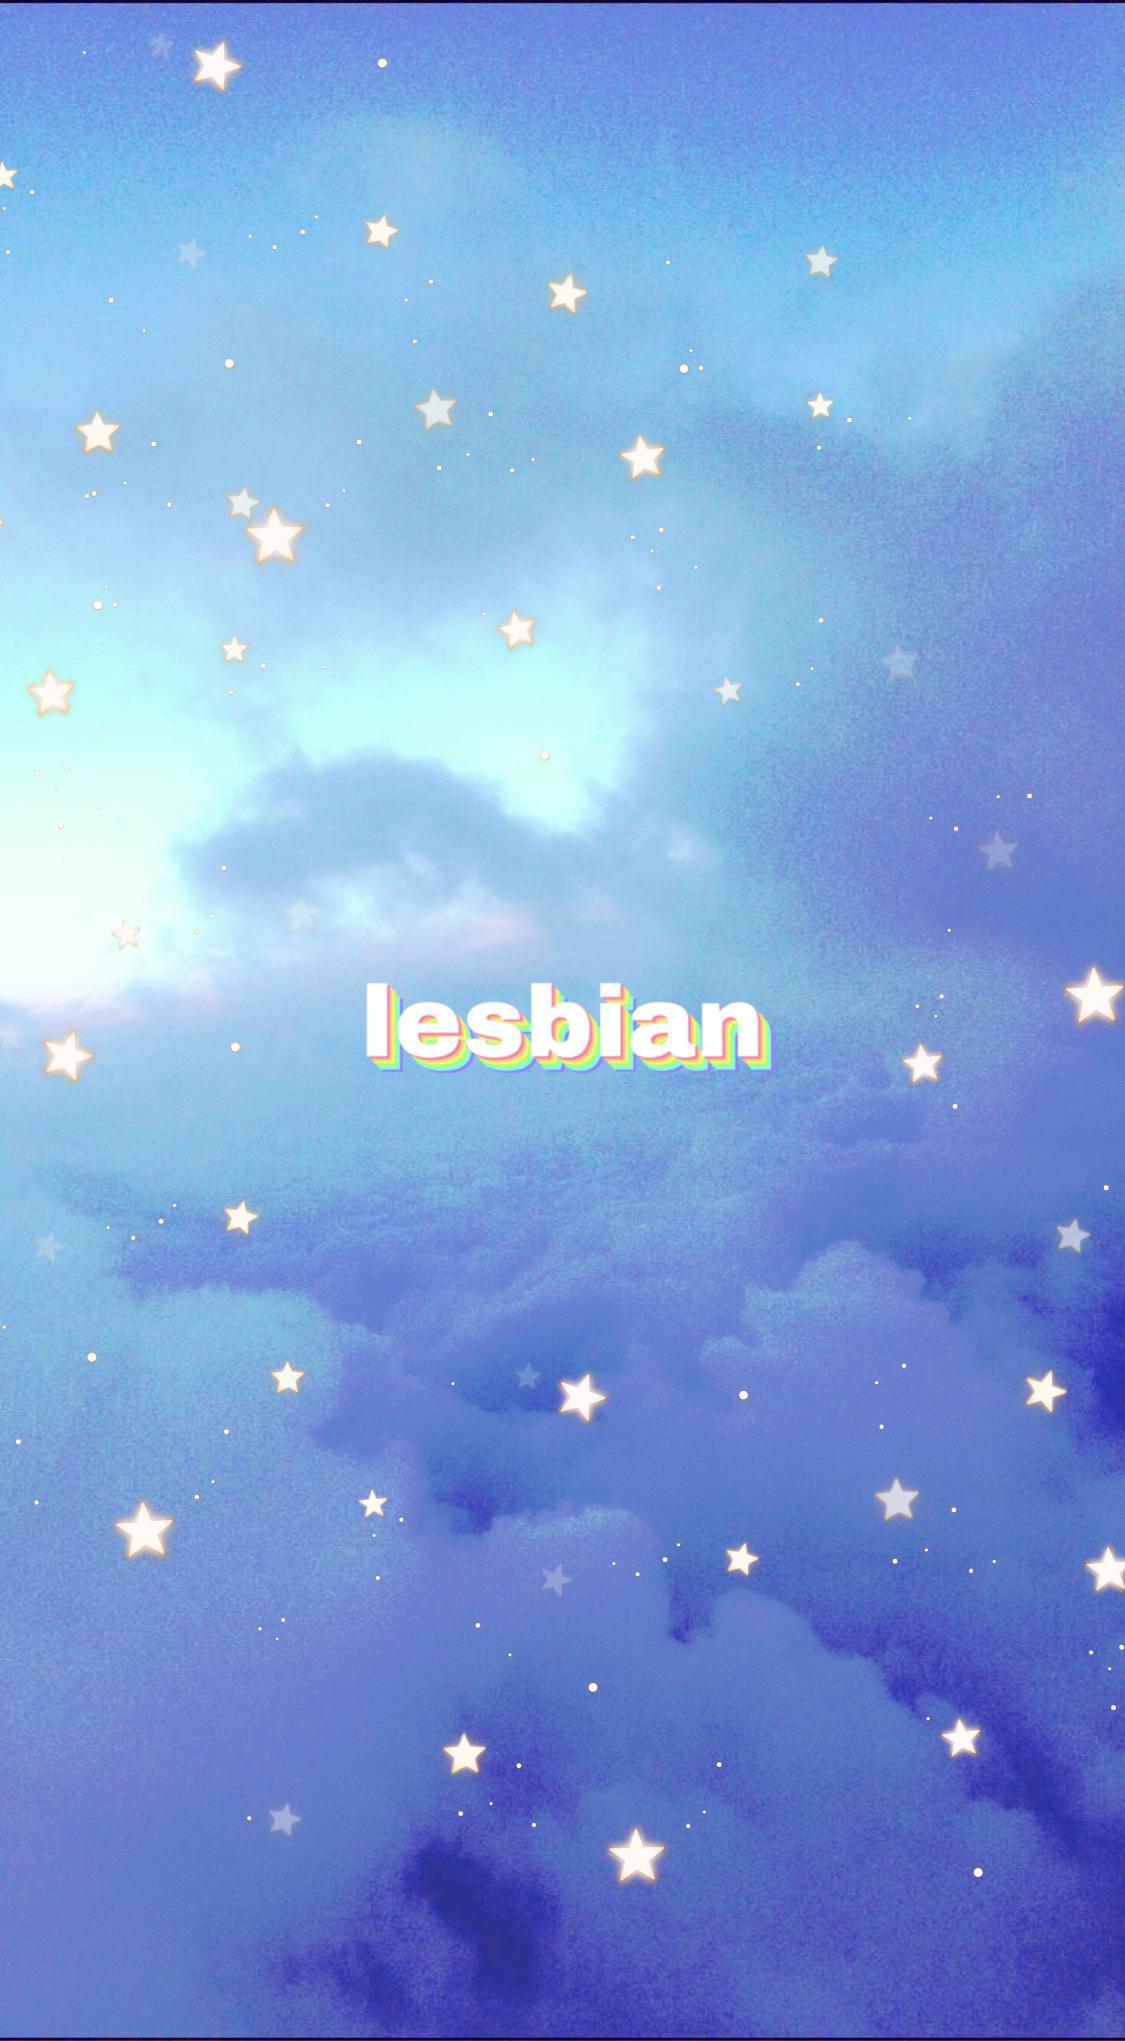 I made lesbian wallpaper for you guys! I hope you like them (stickers are coming soon as well)!